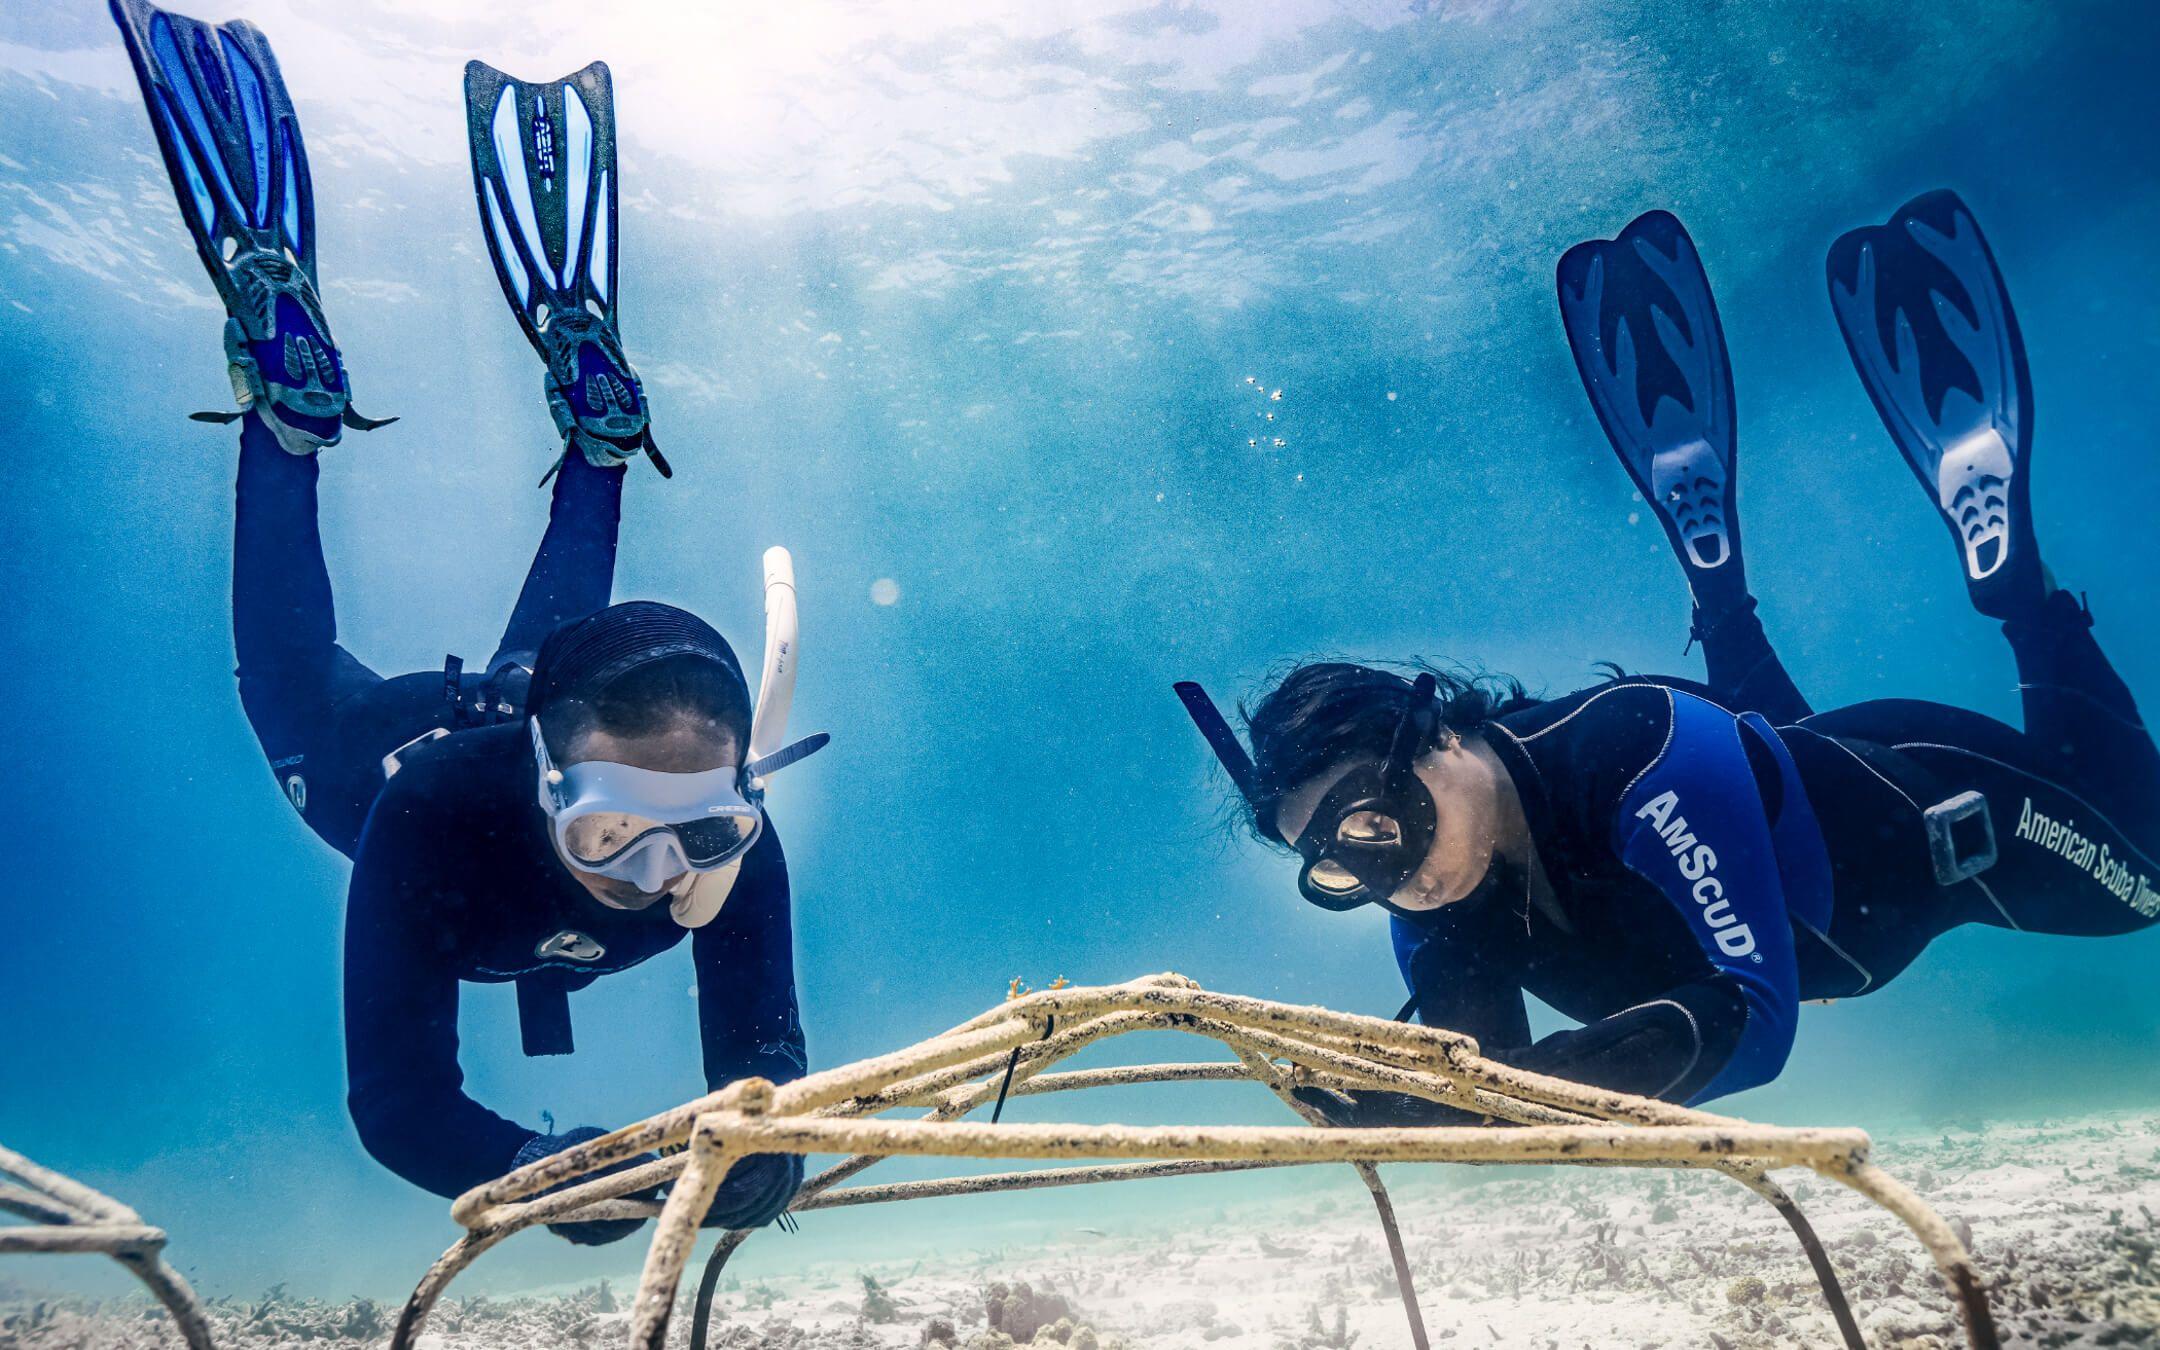 Two divers from Coral Catch examine the beginnings of a coral nursery in the shallow waters of Indonesia.
Photographer: Florian Allgauer